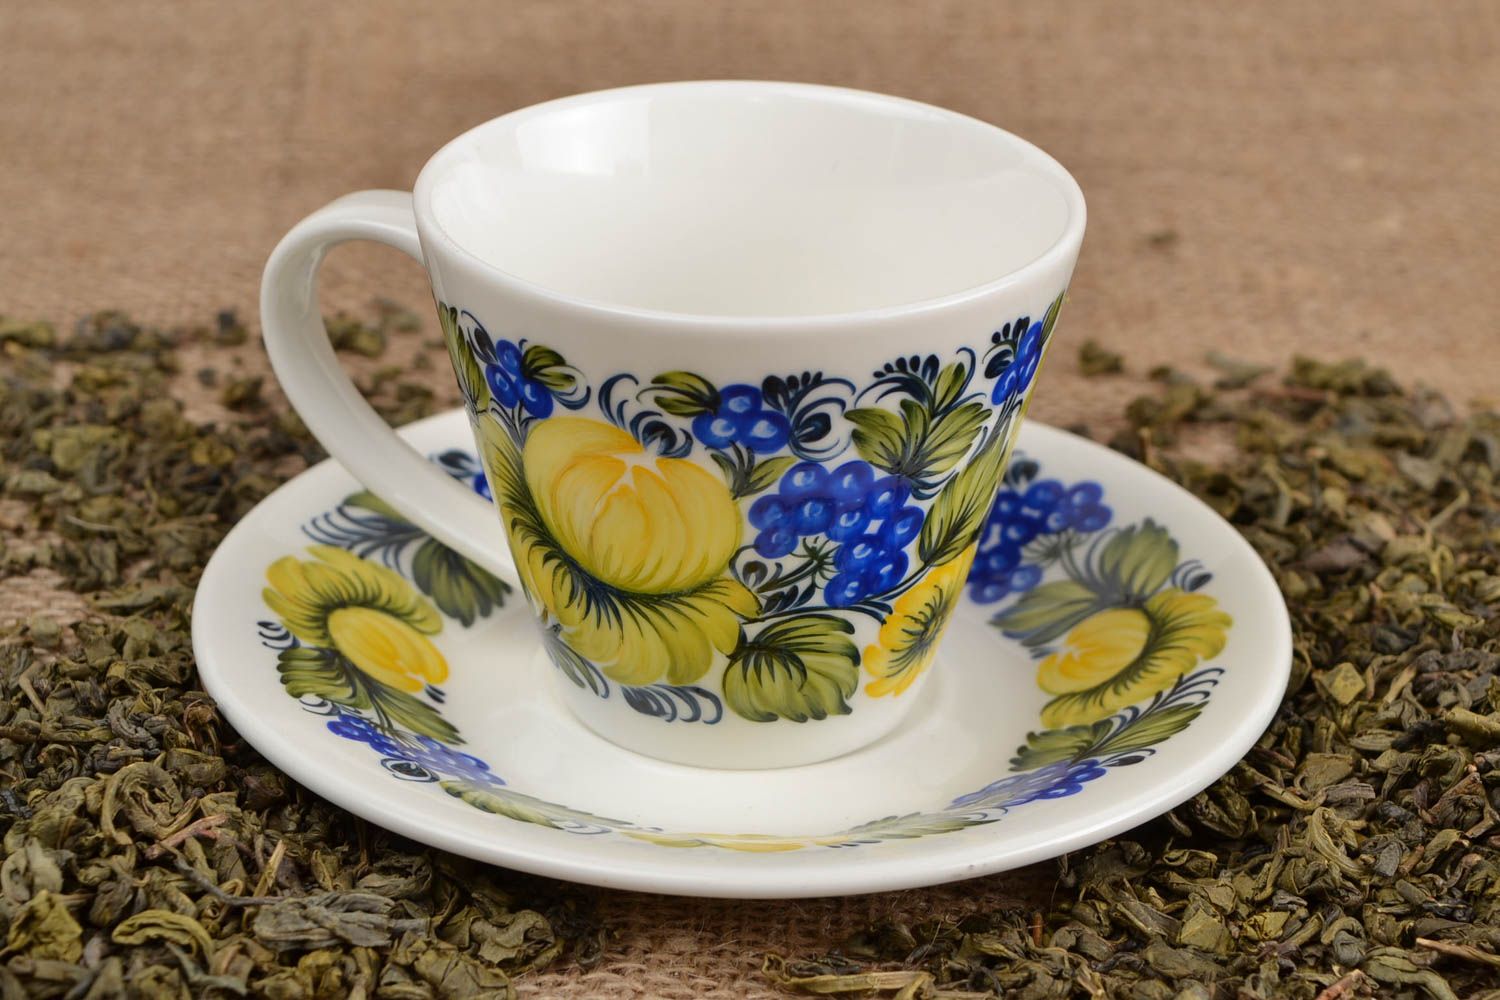 Porcelain white 5 oz coffee cup with saucer and yellow, blue floral pattern photo 1